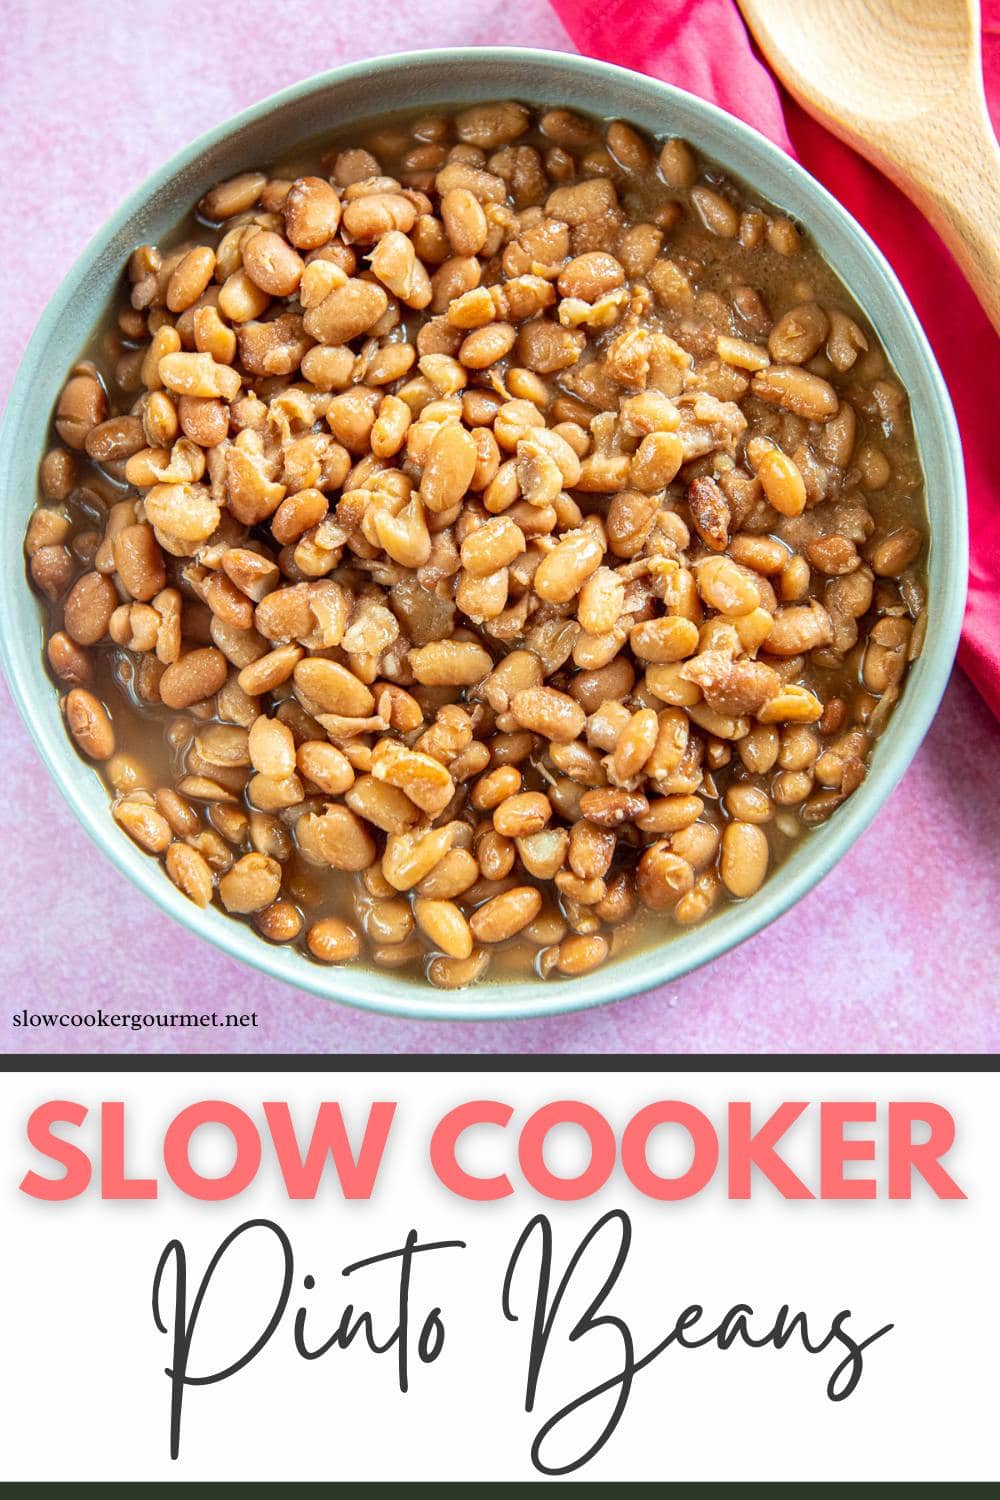 2-Quart Slow Cooker Recipe for Spicy Canned Pinto Beans • A